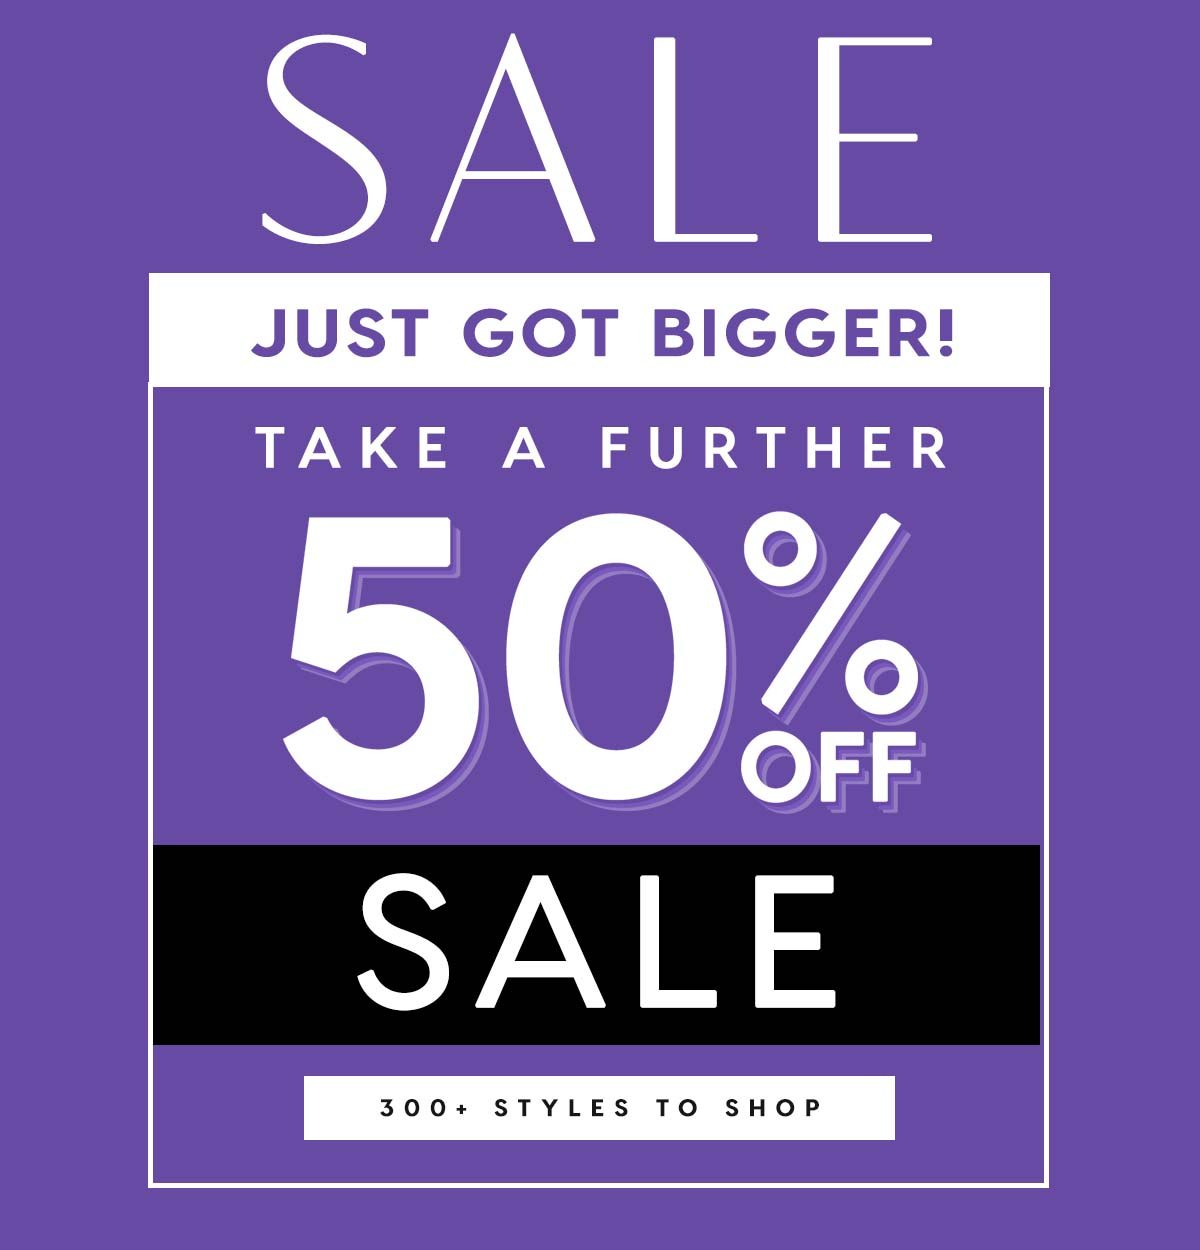 Sale Just Got Bigger! Take A Further 50% Off Sale. 300+ Styles To Shop.